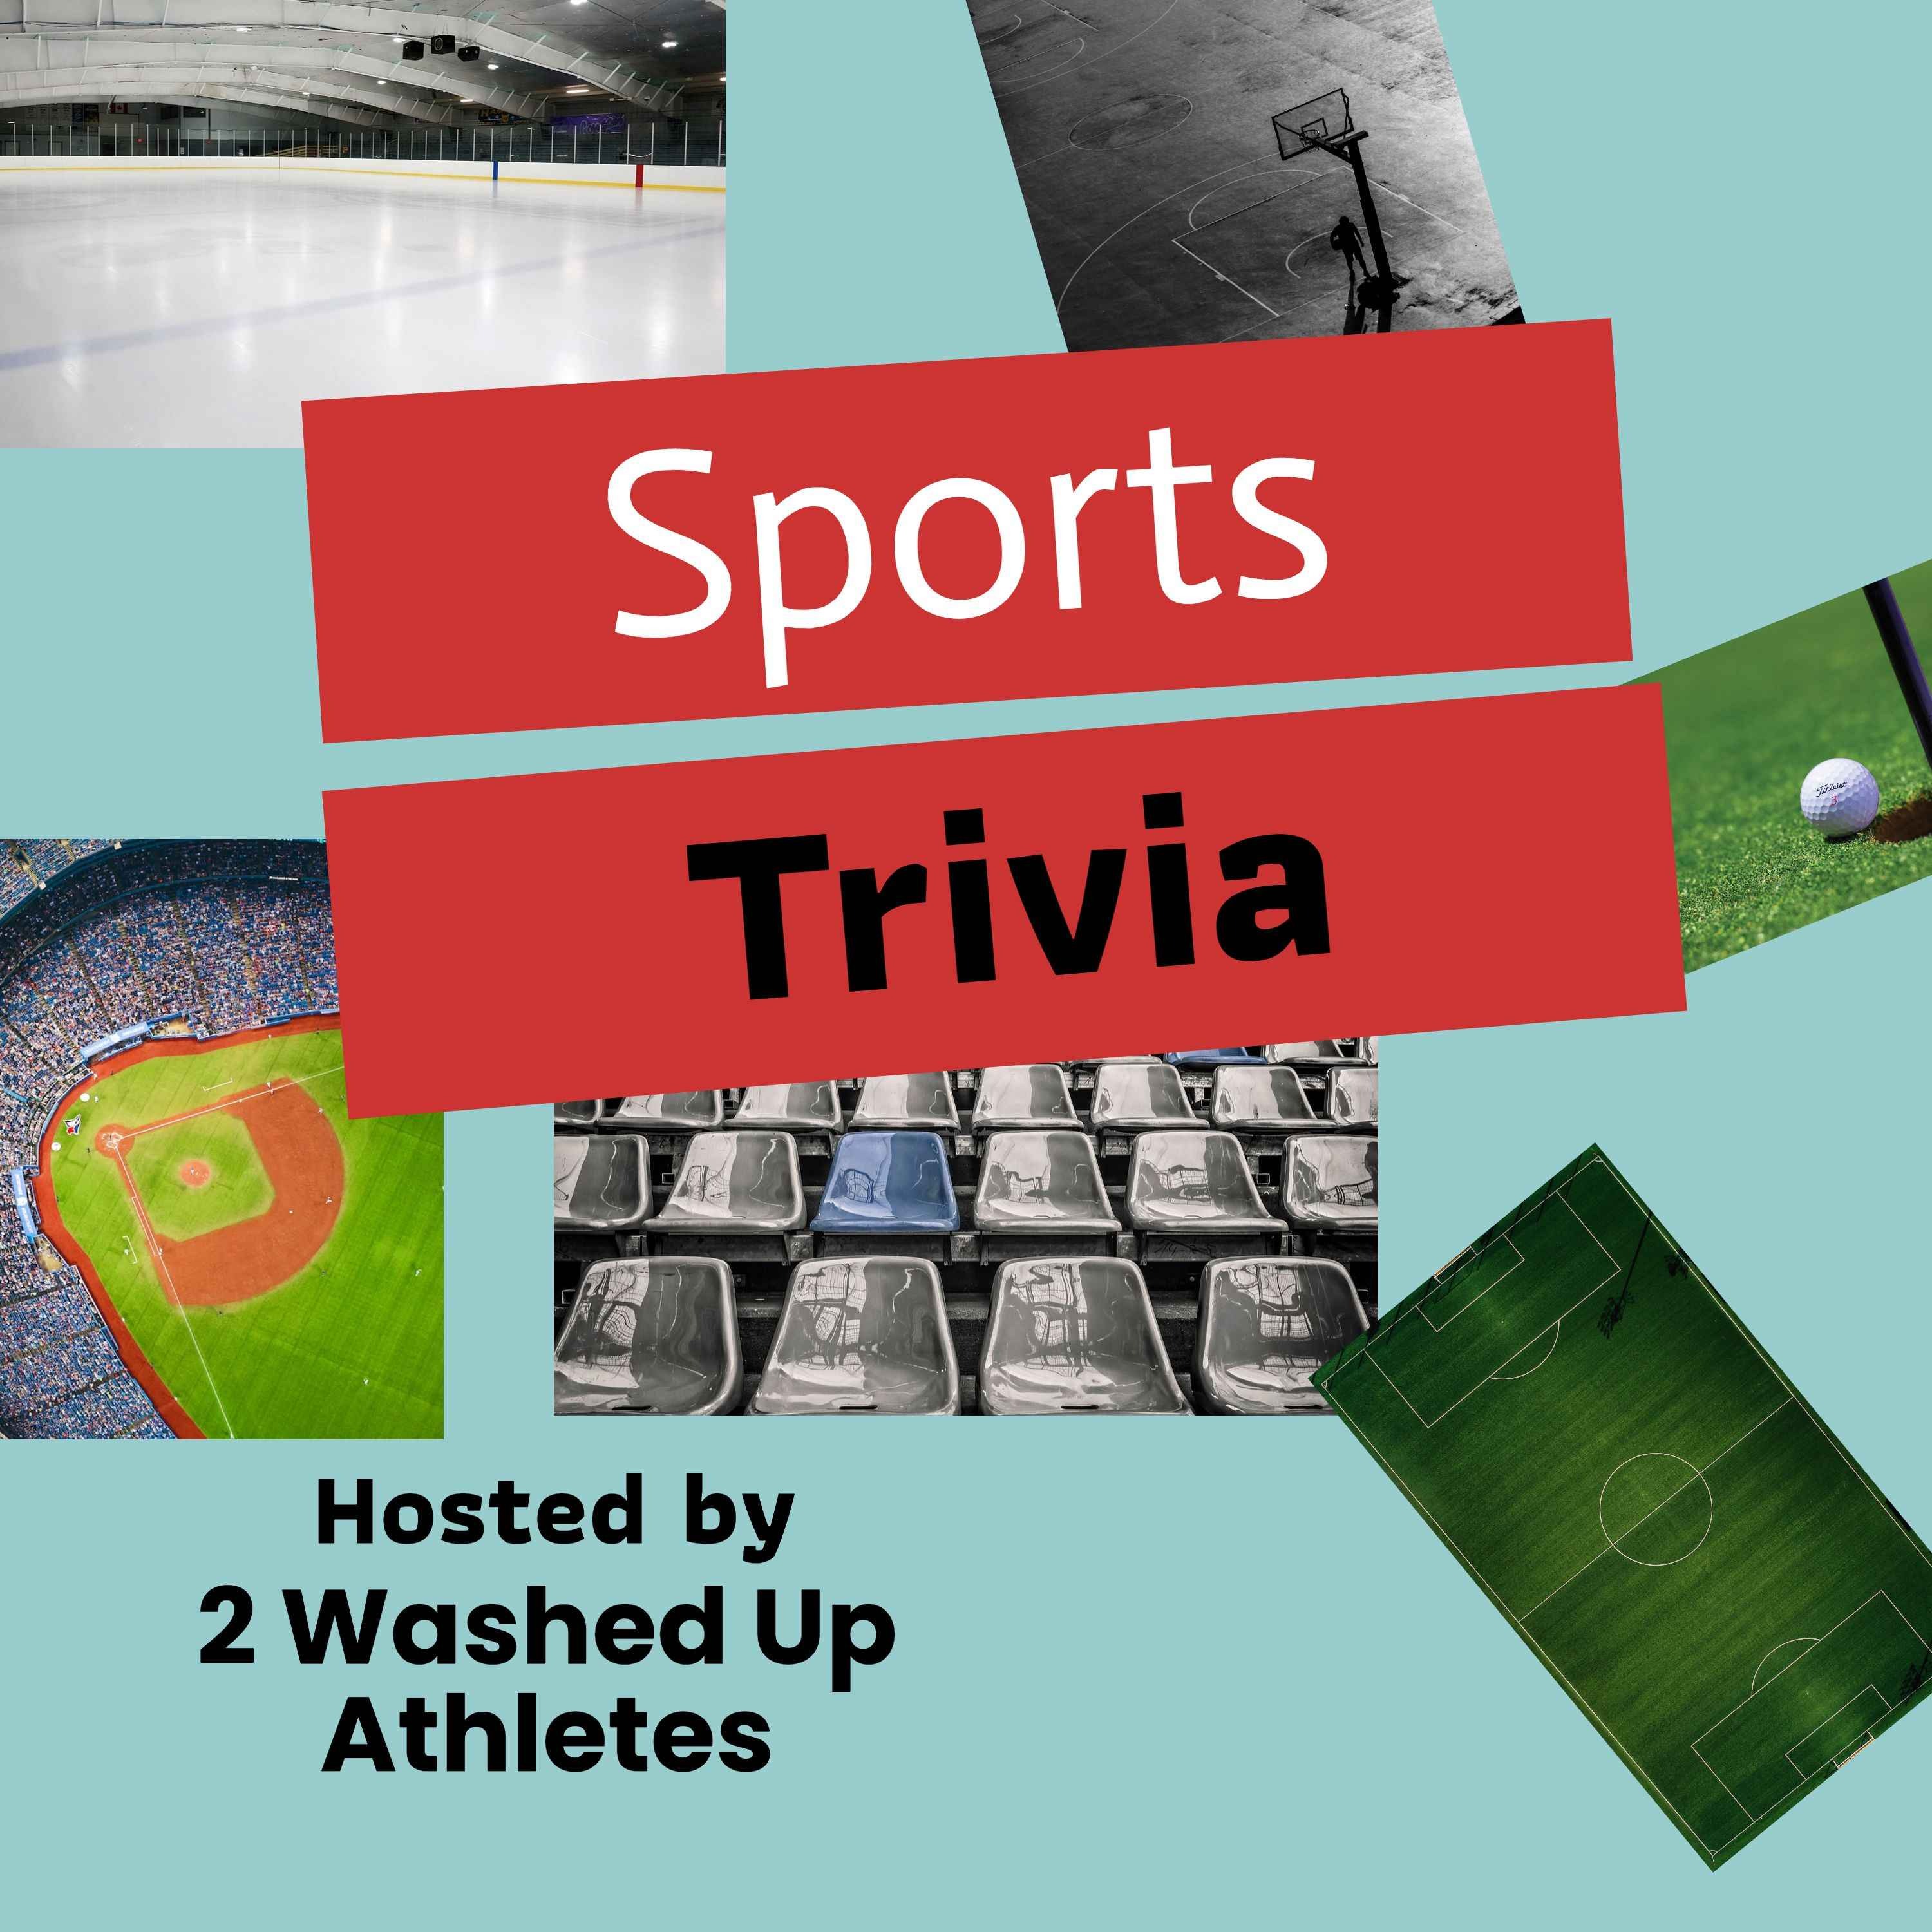 Sports Trivia - Hosted by 2 Washed Up Athletes